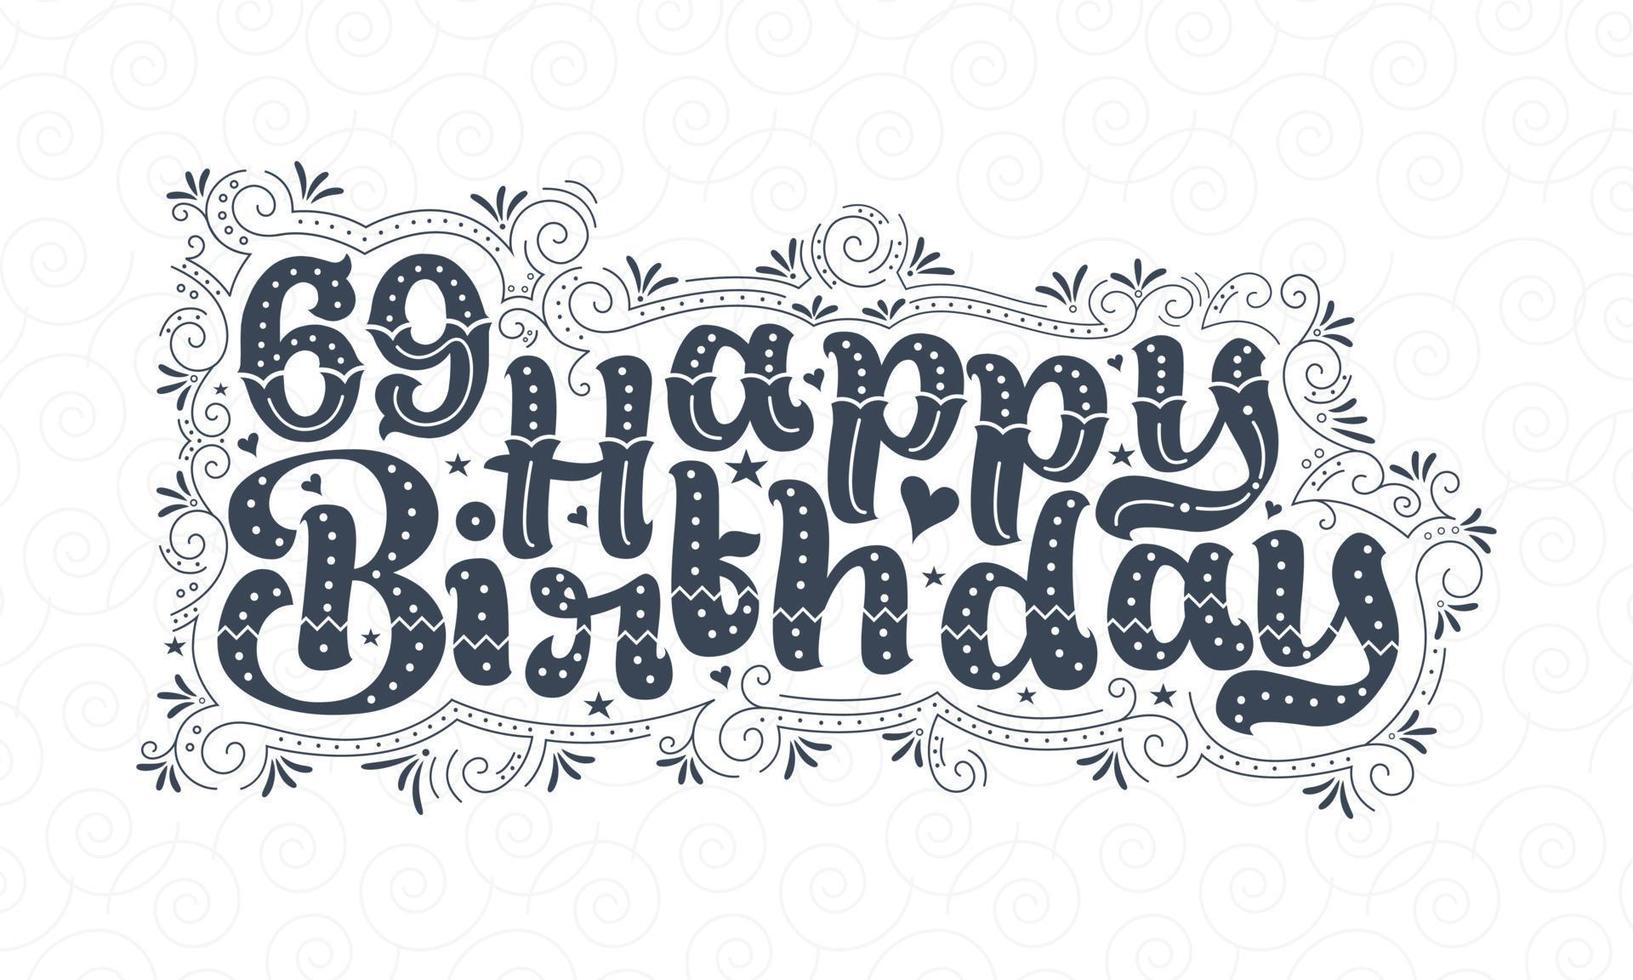 69th Happy Birthday lettering, 69 years Birthday beautiful typography design with dots, lines, and leaves. vector